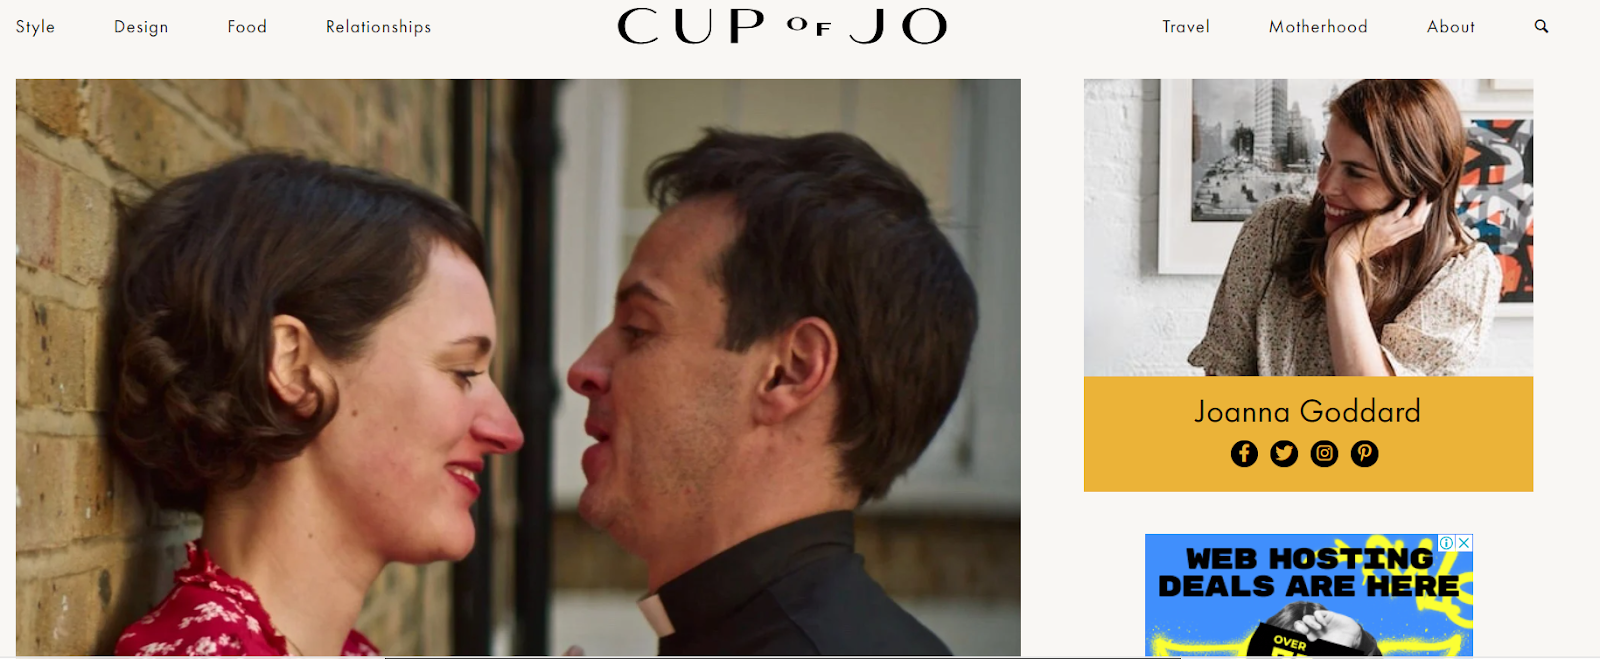 cup of jo blog